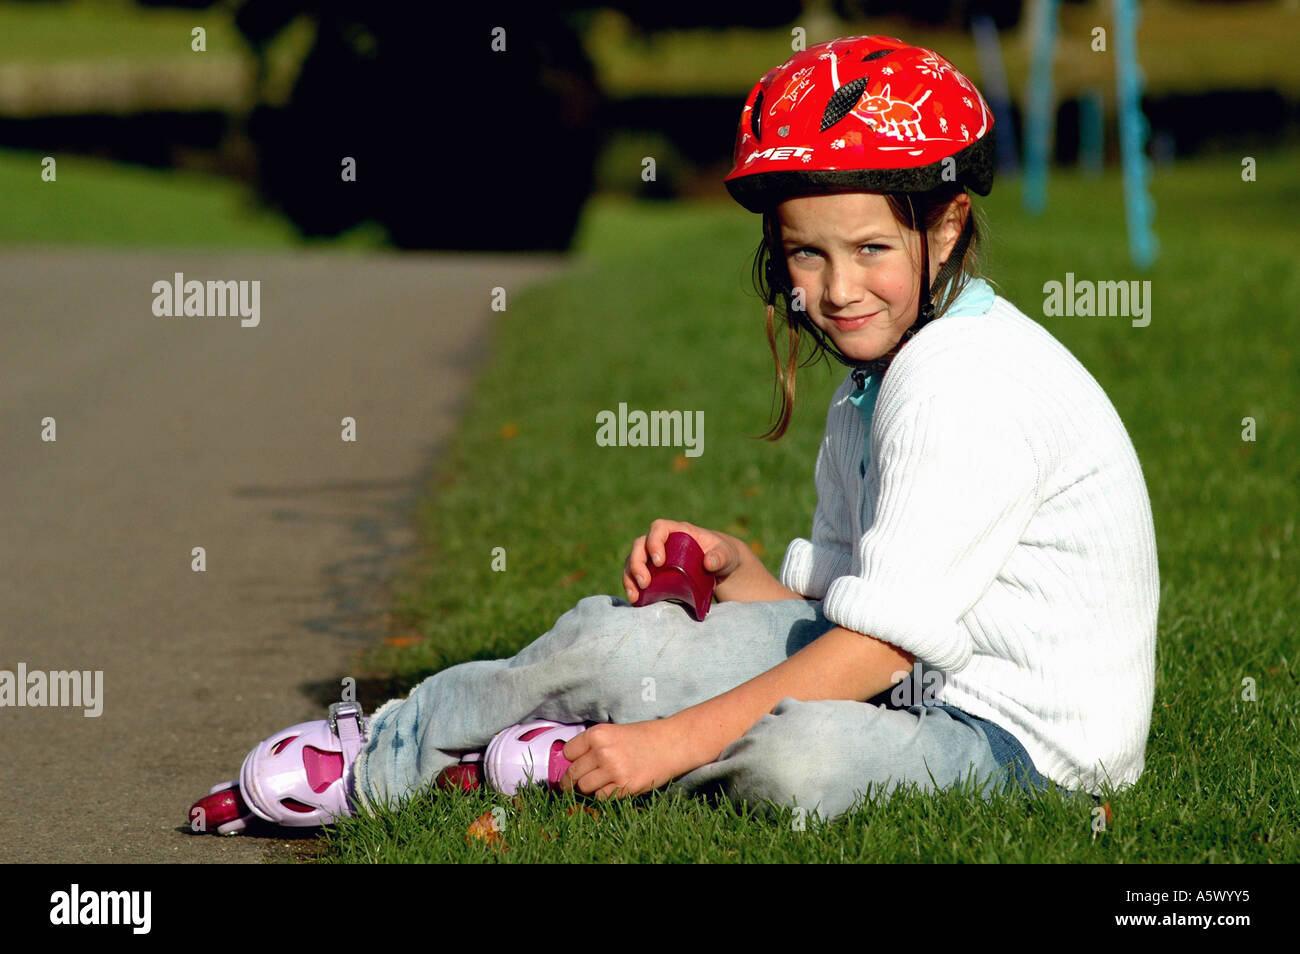 young girl wearing a red safety helment and sitting on the grass in the park having a rest from rollerblading Stock Photo